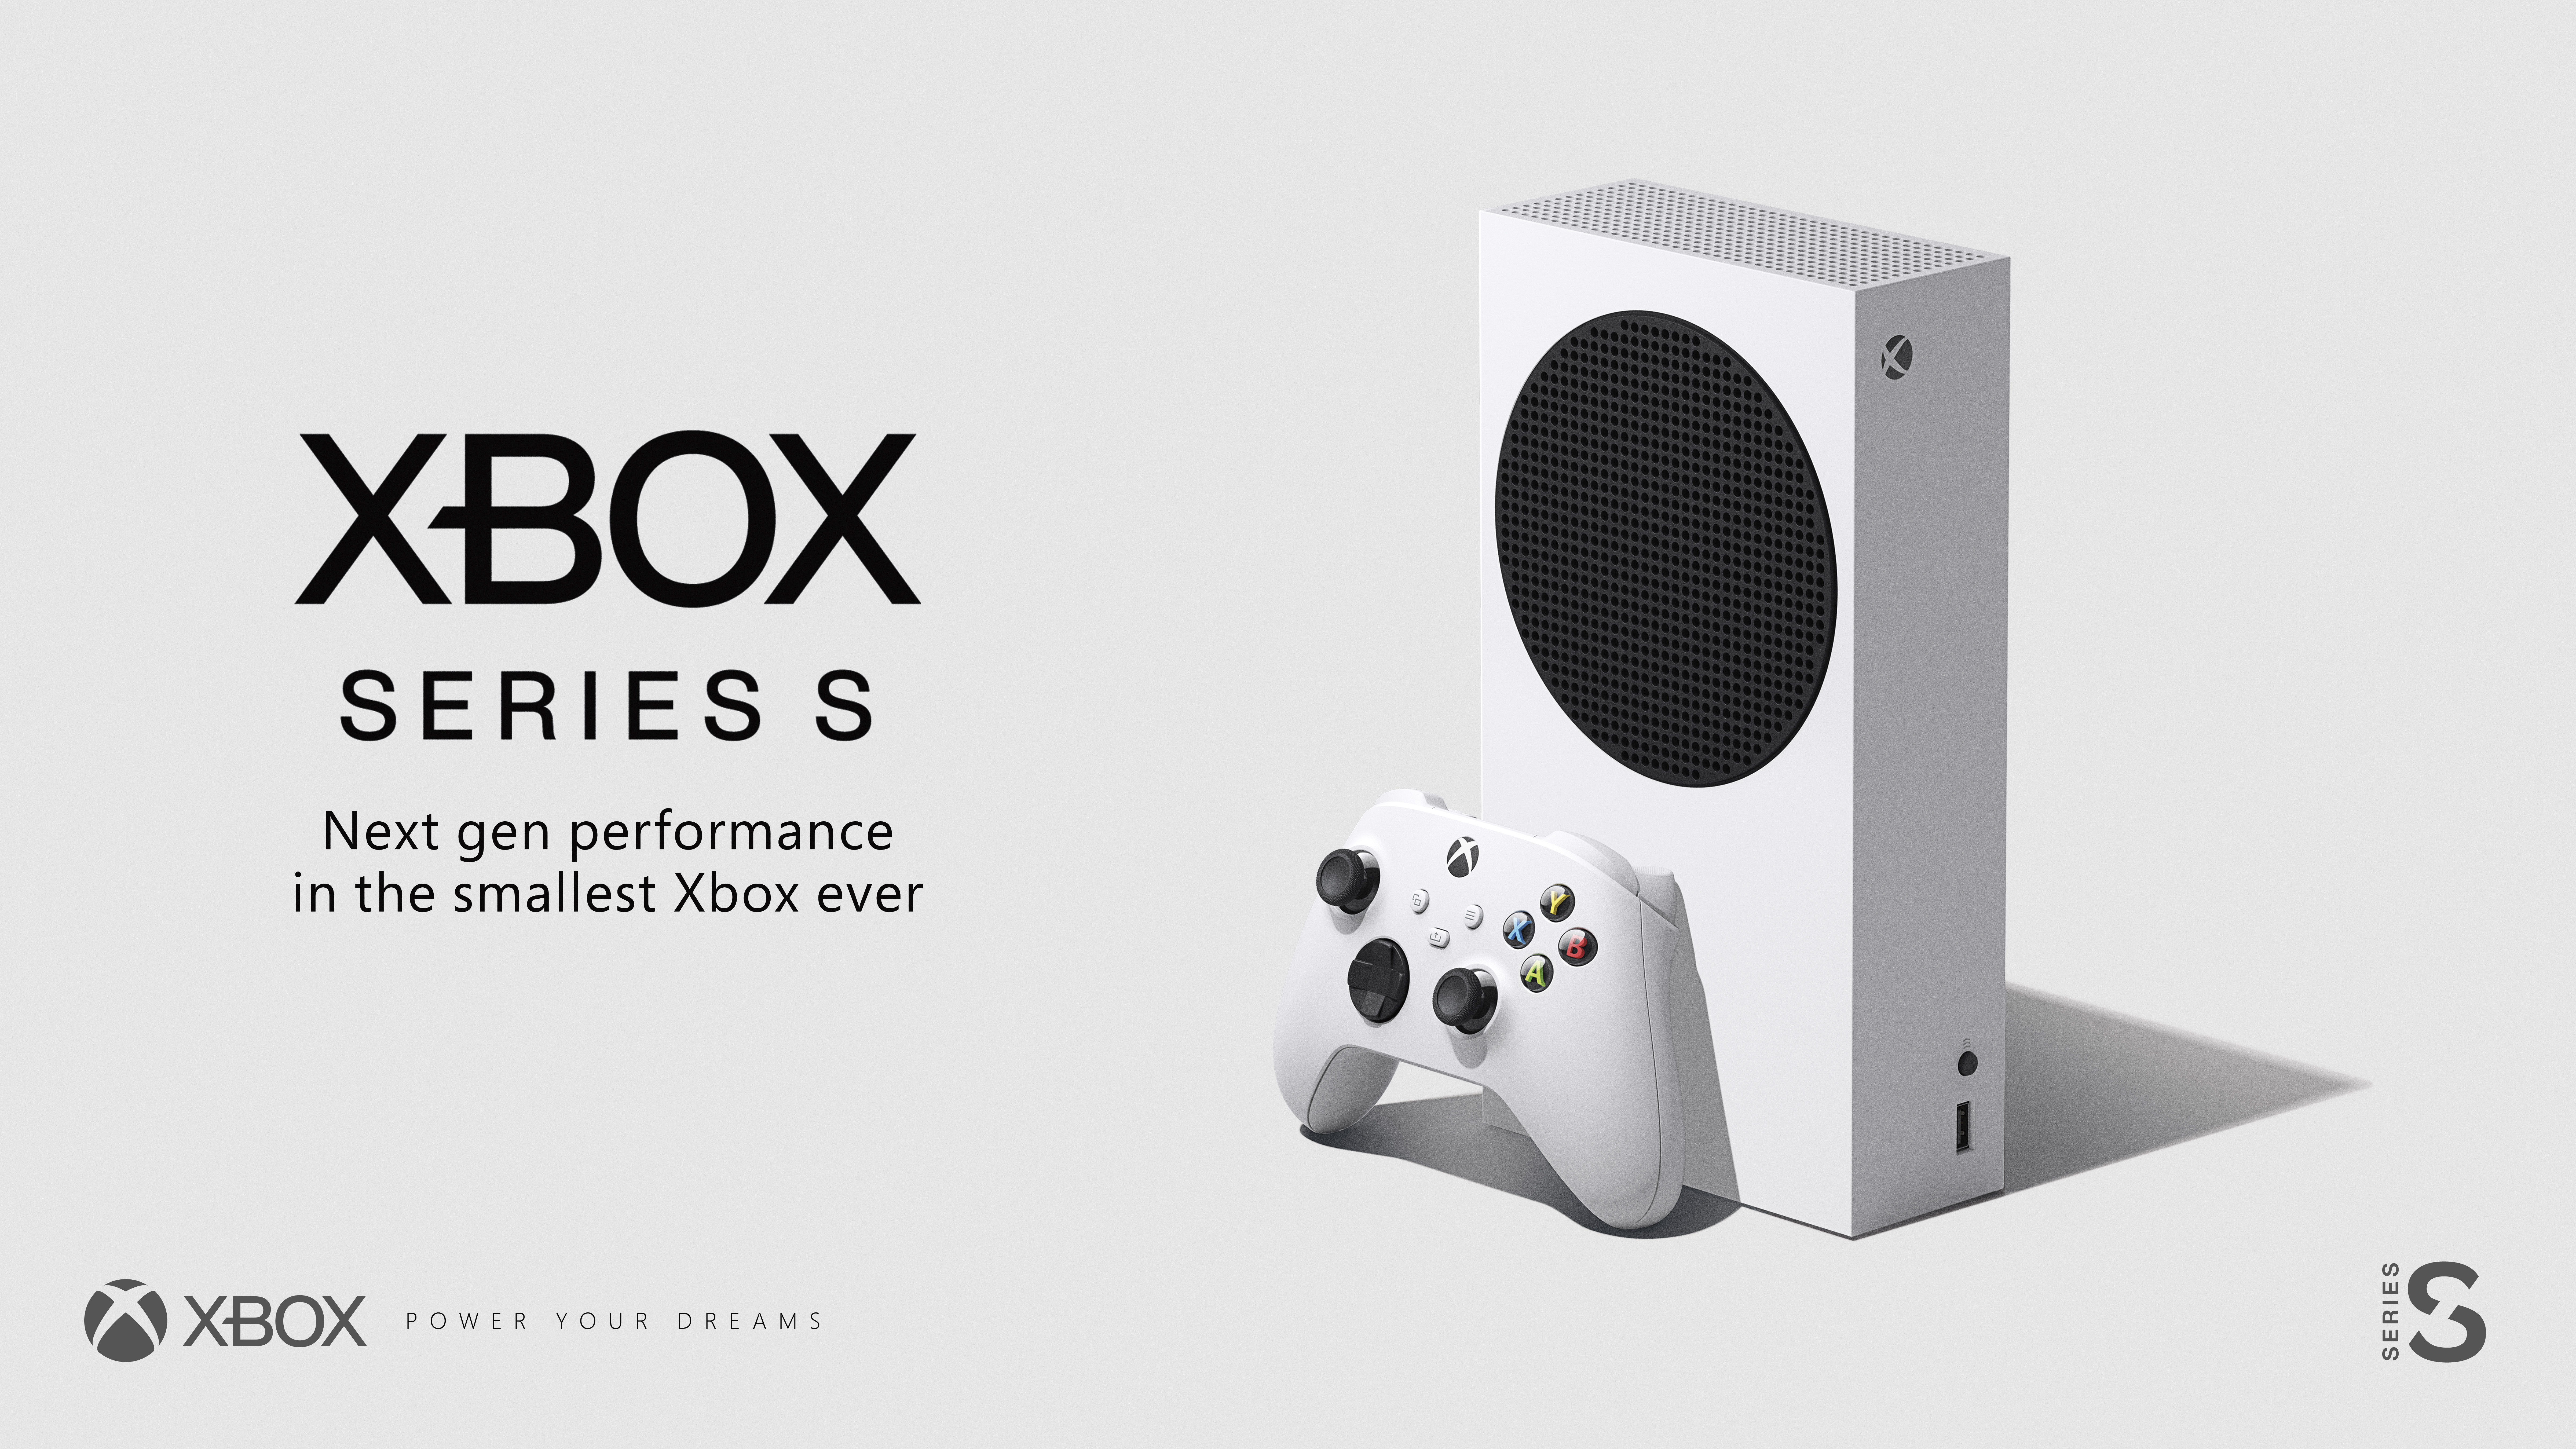 Still Image_Xbox Series S_1_Hero Asset_Console + Controller